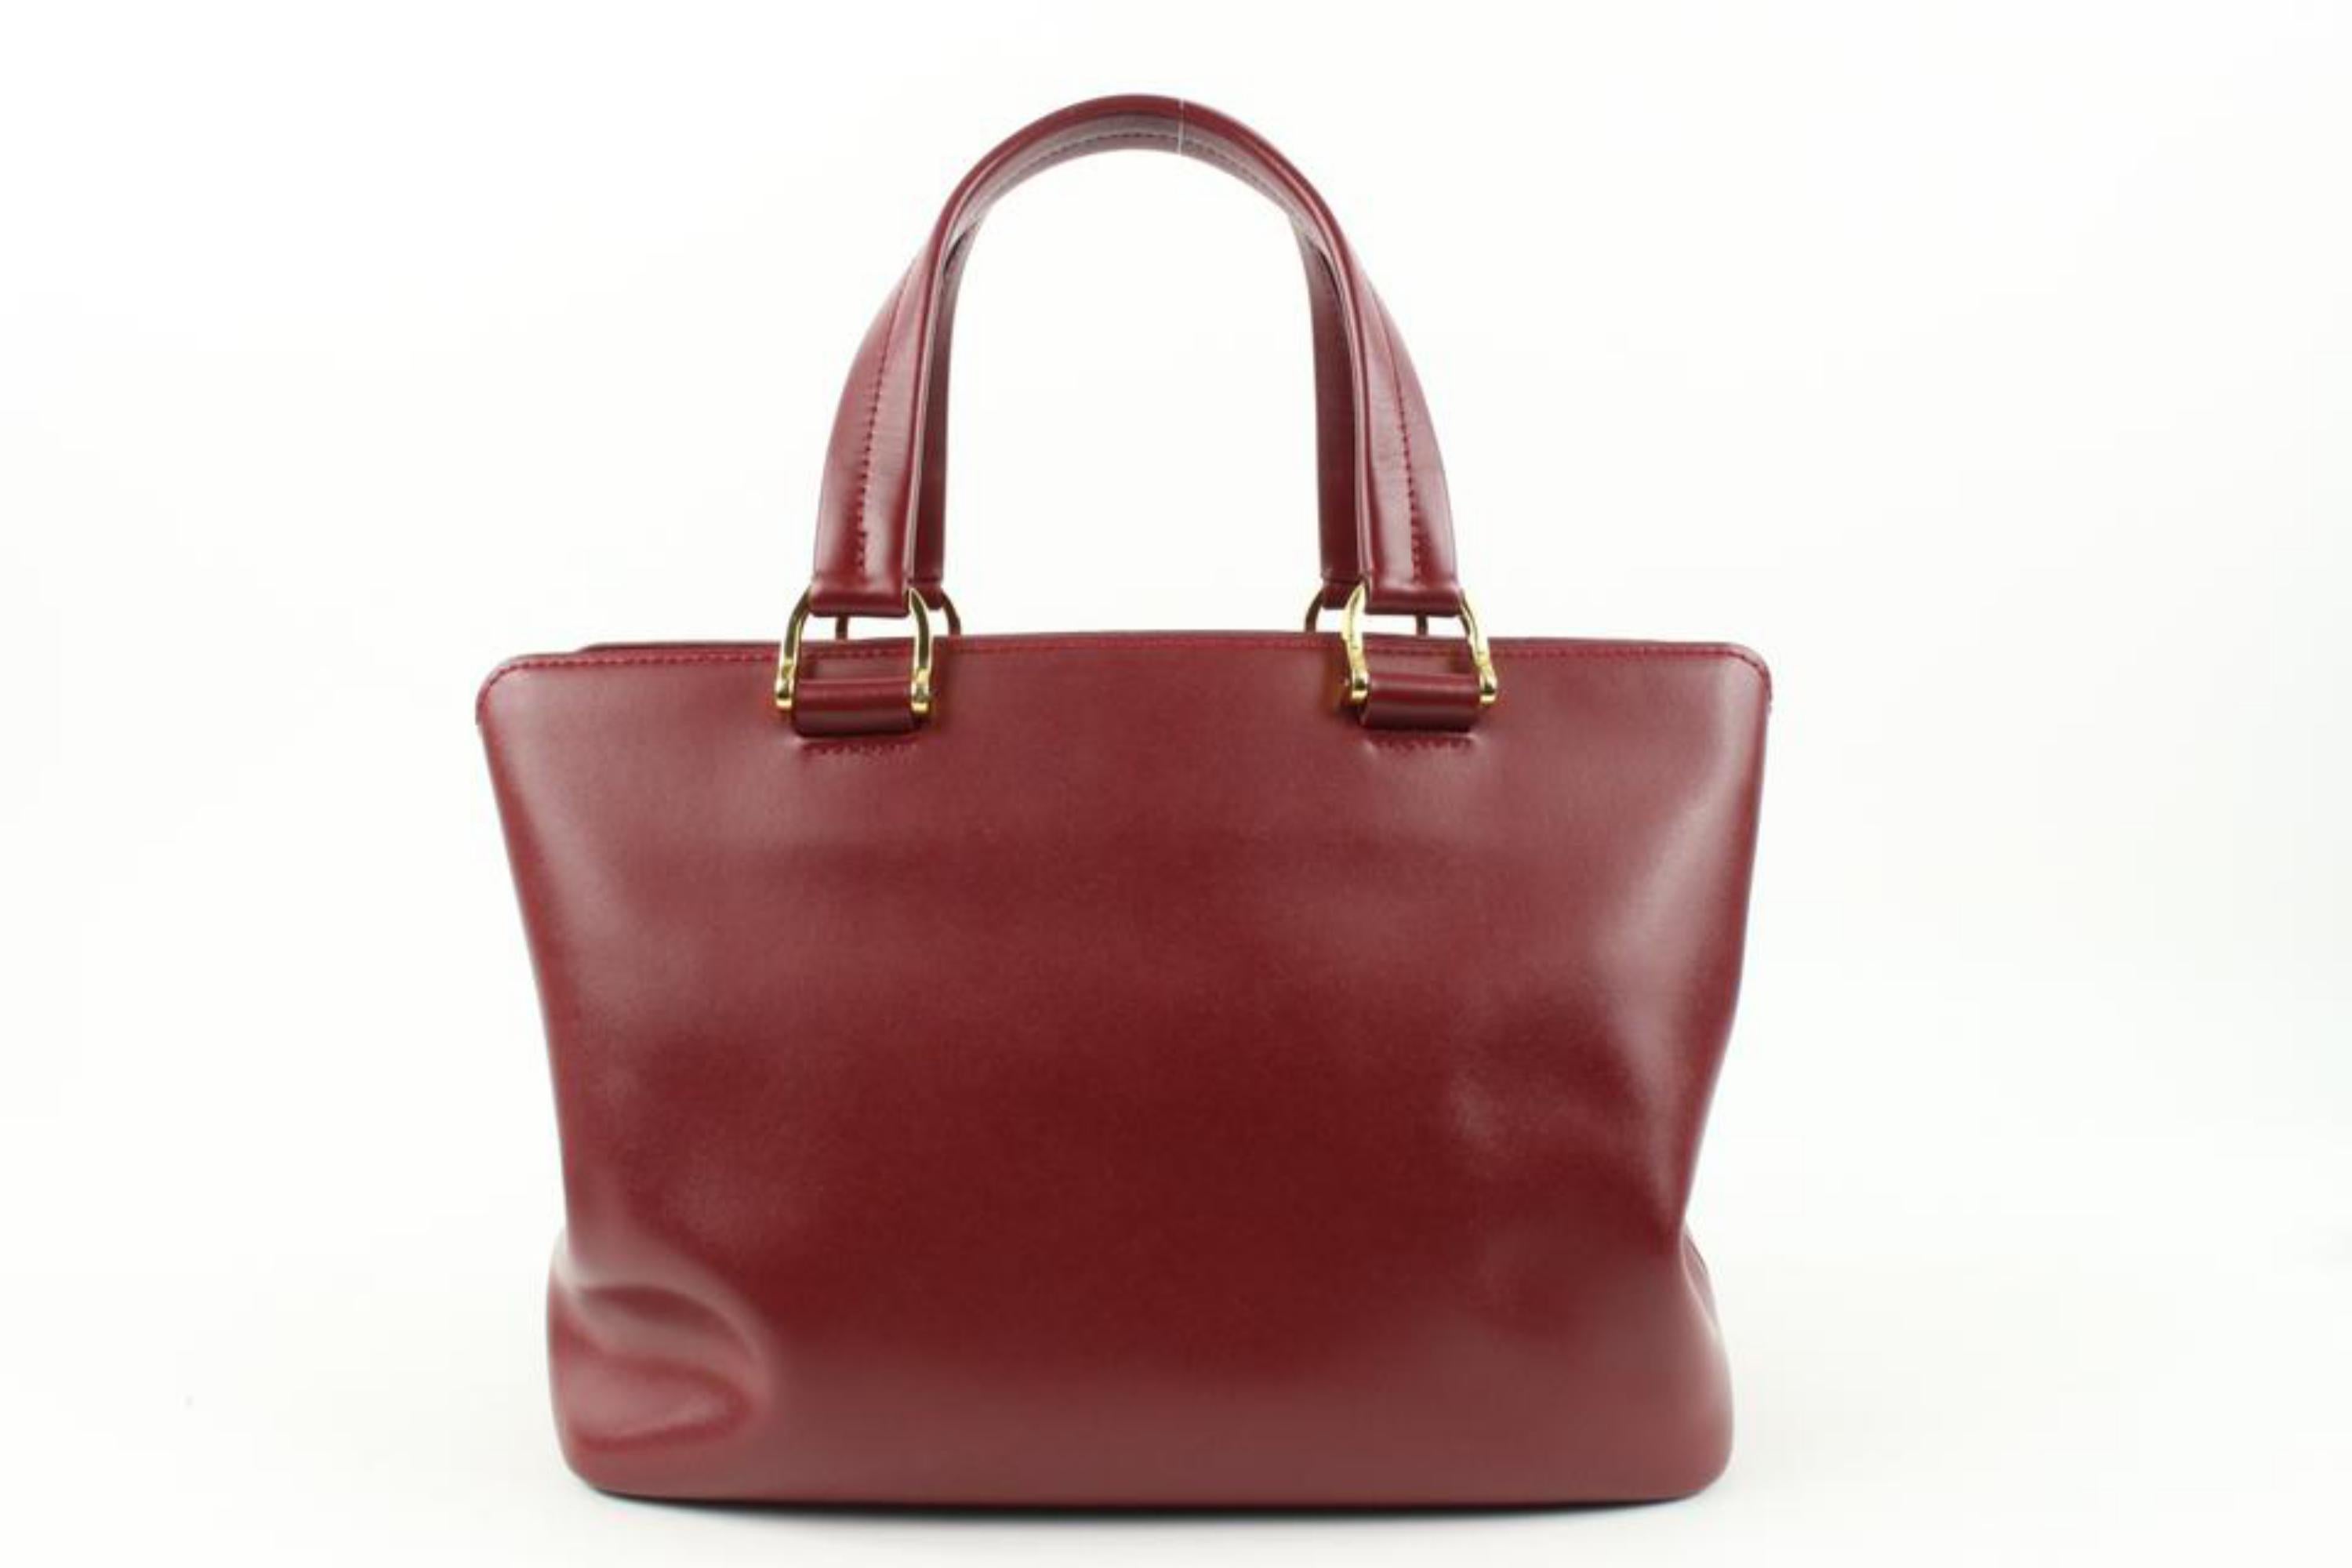 Women's Longchamp Dark Red Burgundy Leather 2way Tote Bag with Strap 10LC113